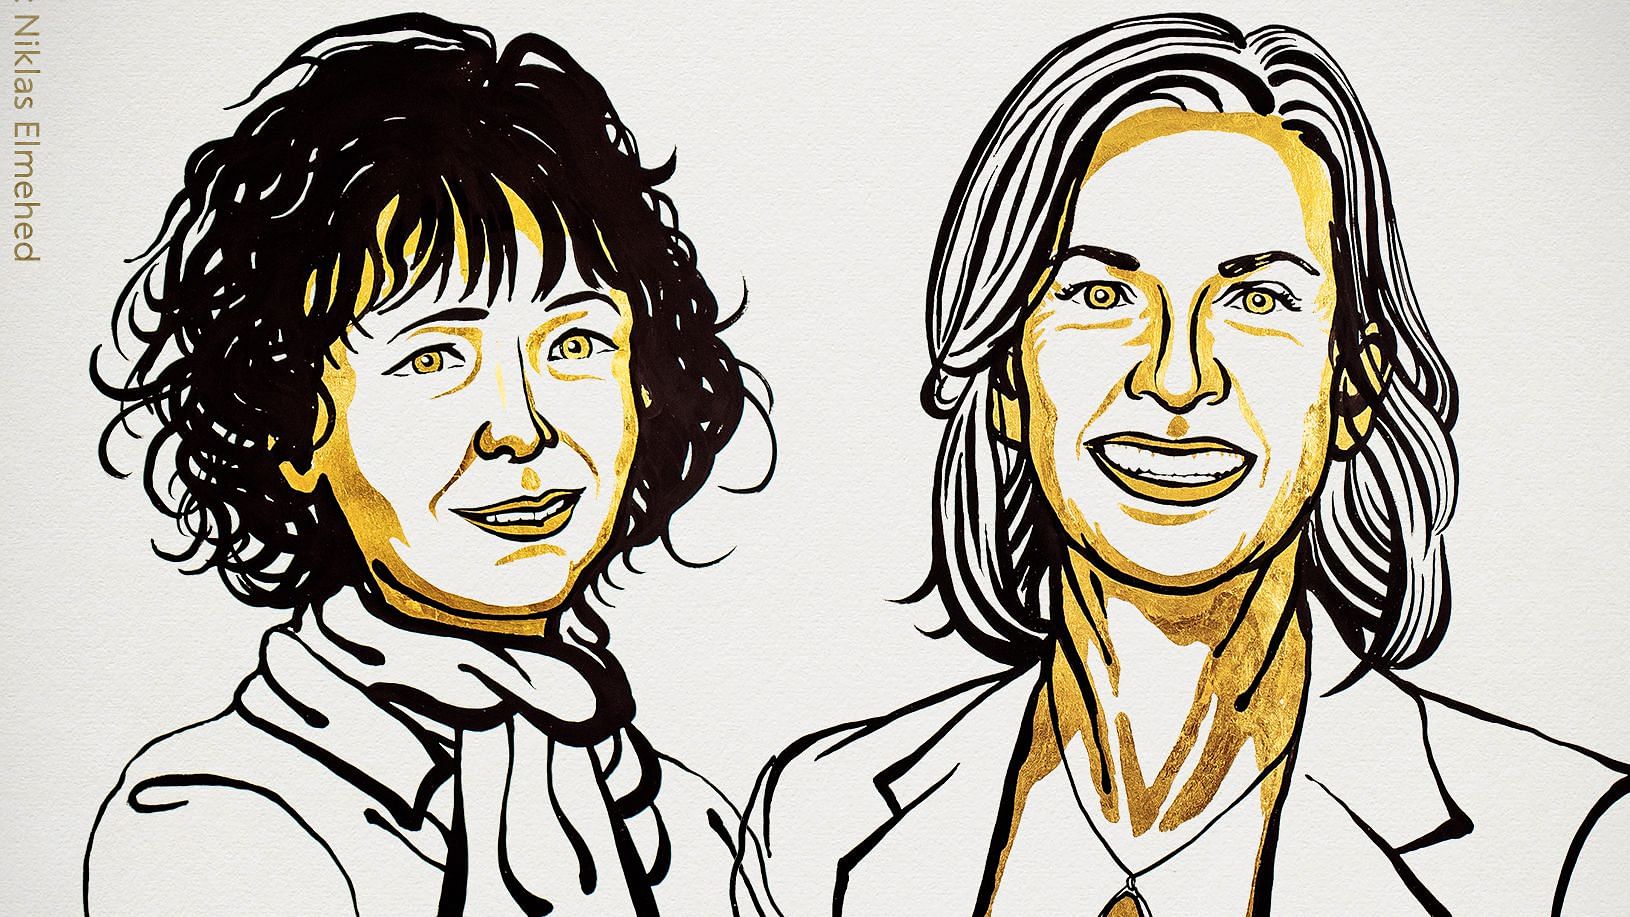 The 2020 Nobel Prize in Chemistry was on Wednesday, 7 October, awarded to Emmanuelle Charpentier and Jennifer A. Doudna “for the development of a method for genome editing.”